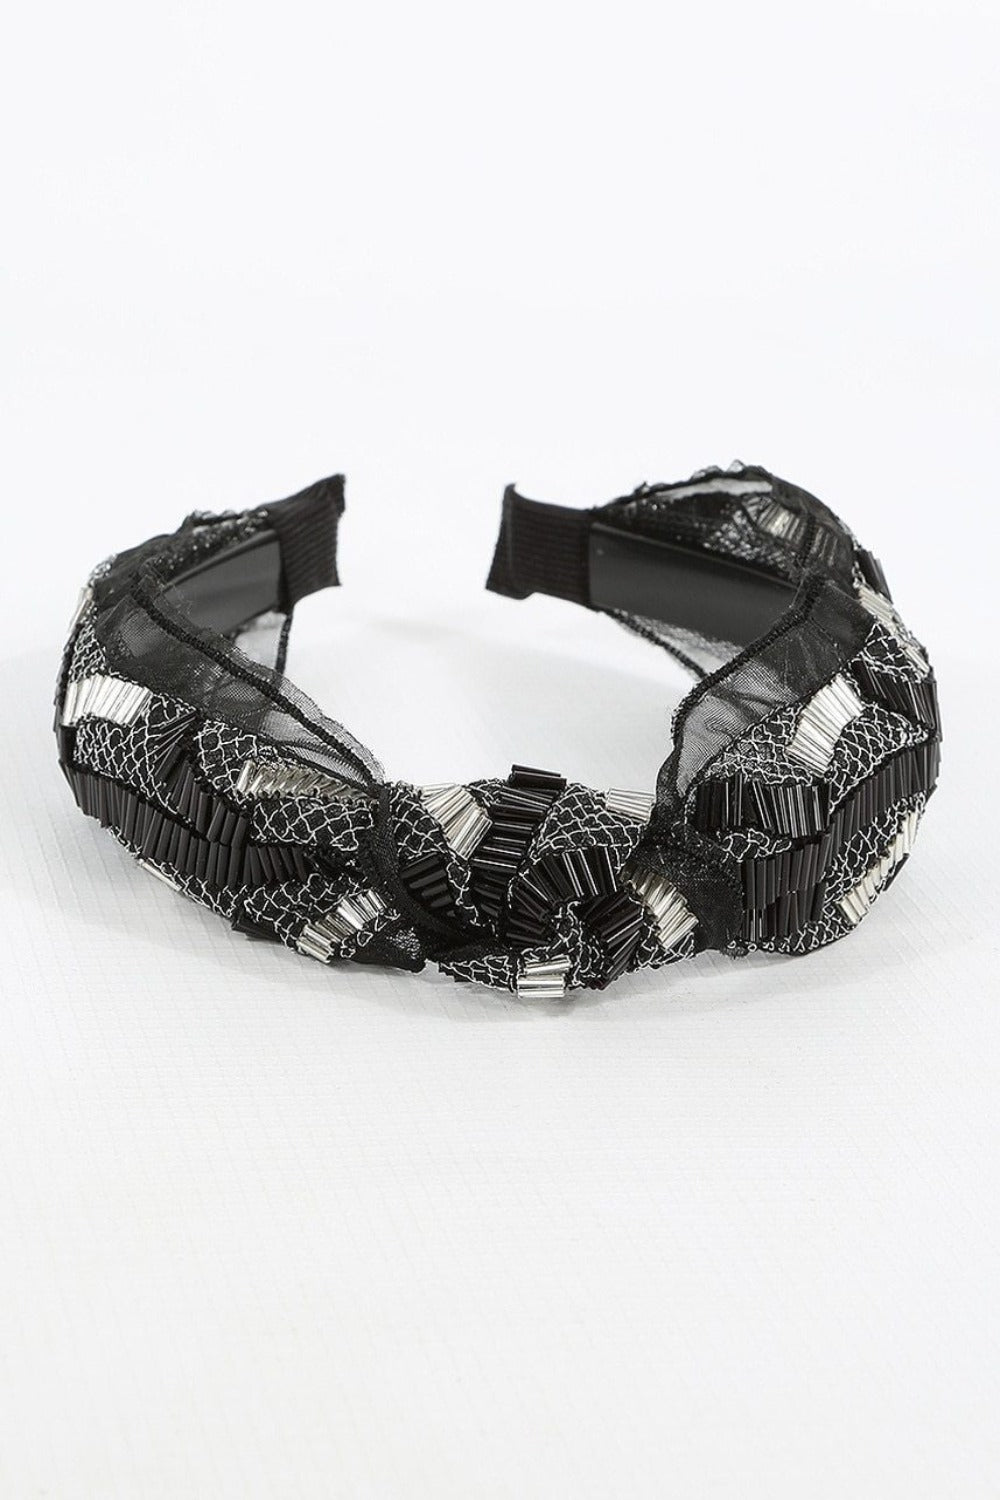 Black & Silver knotted Headband